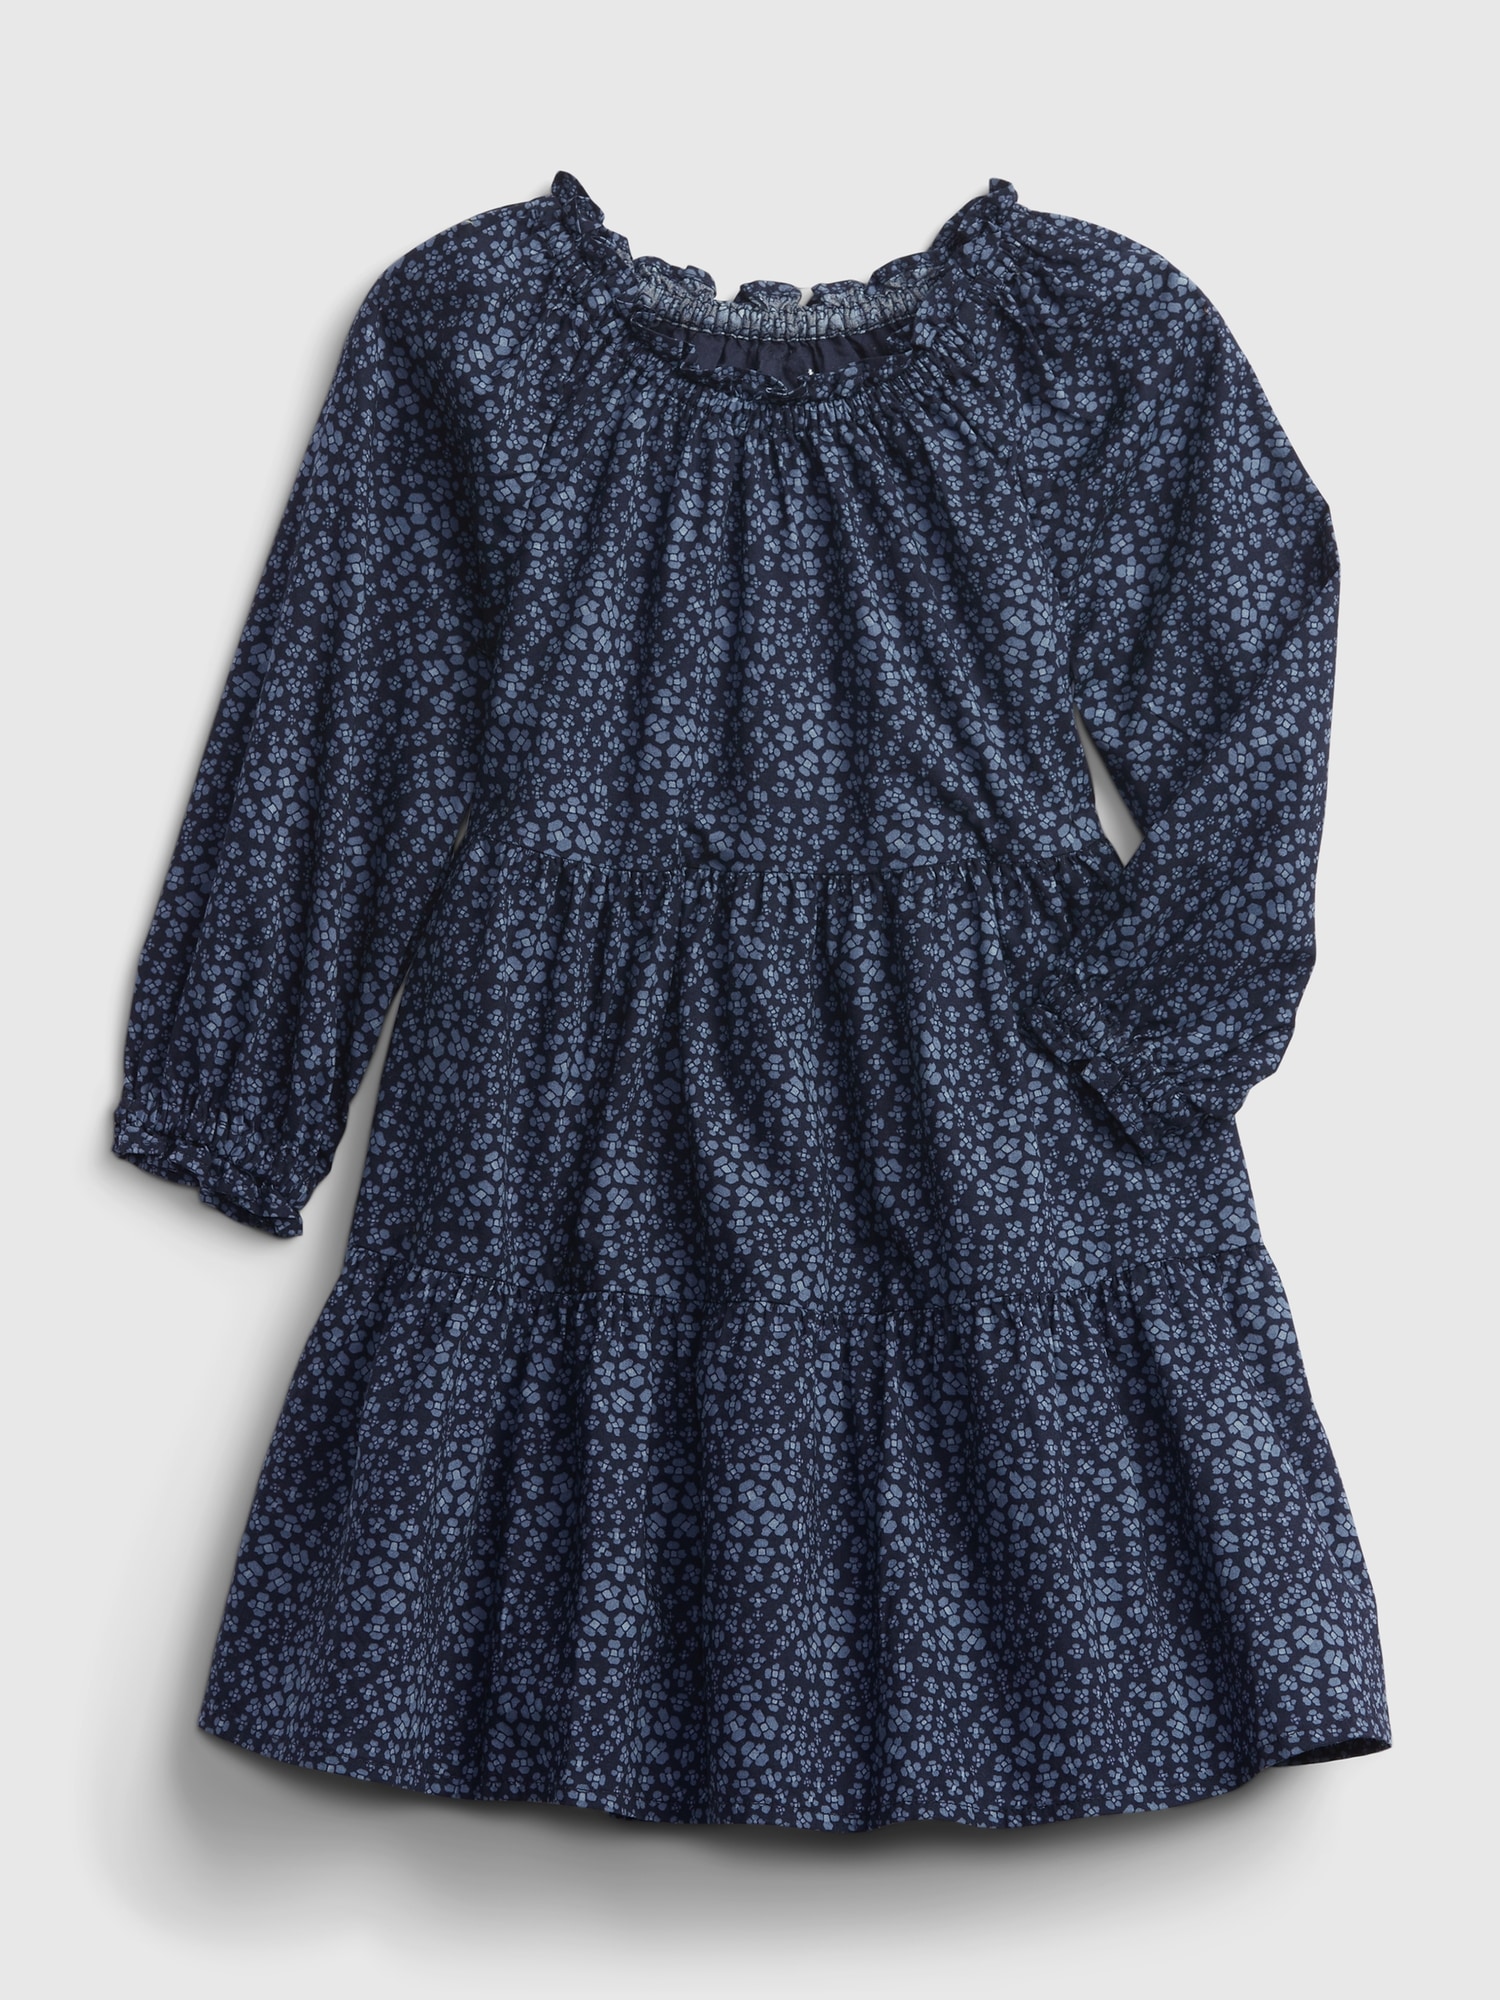 Toddler Tiered Ruffle-Neck Dress